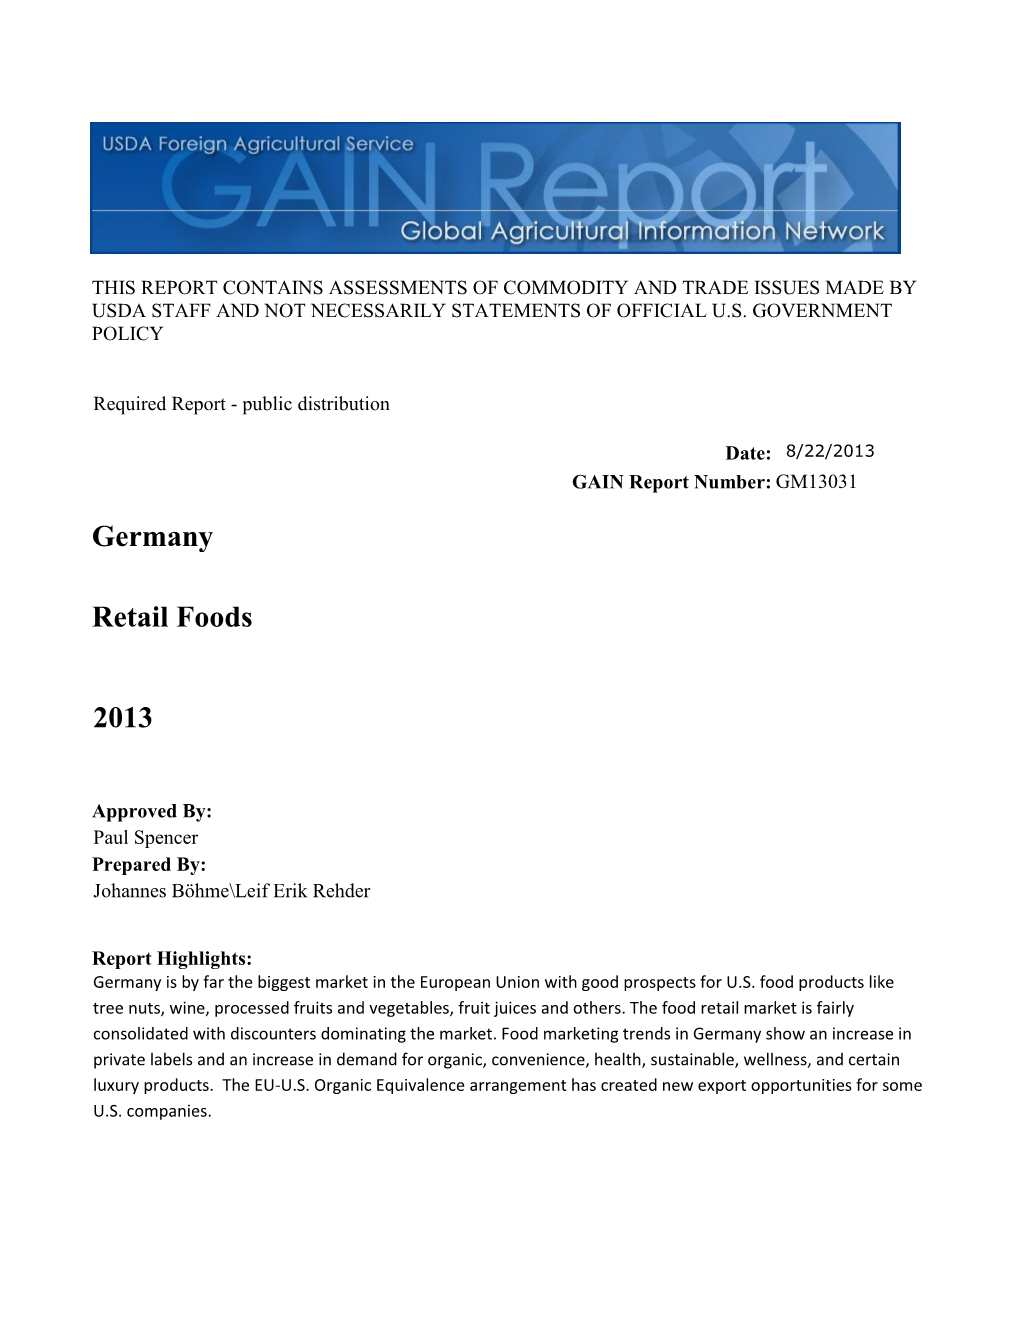 2013 Retail Foods Germany